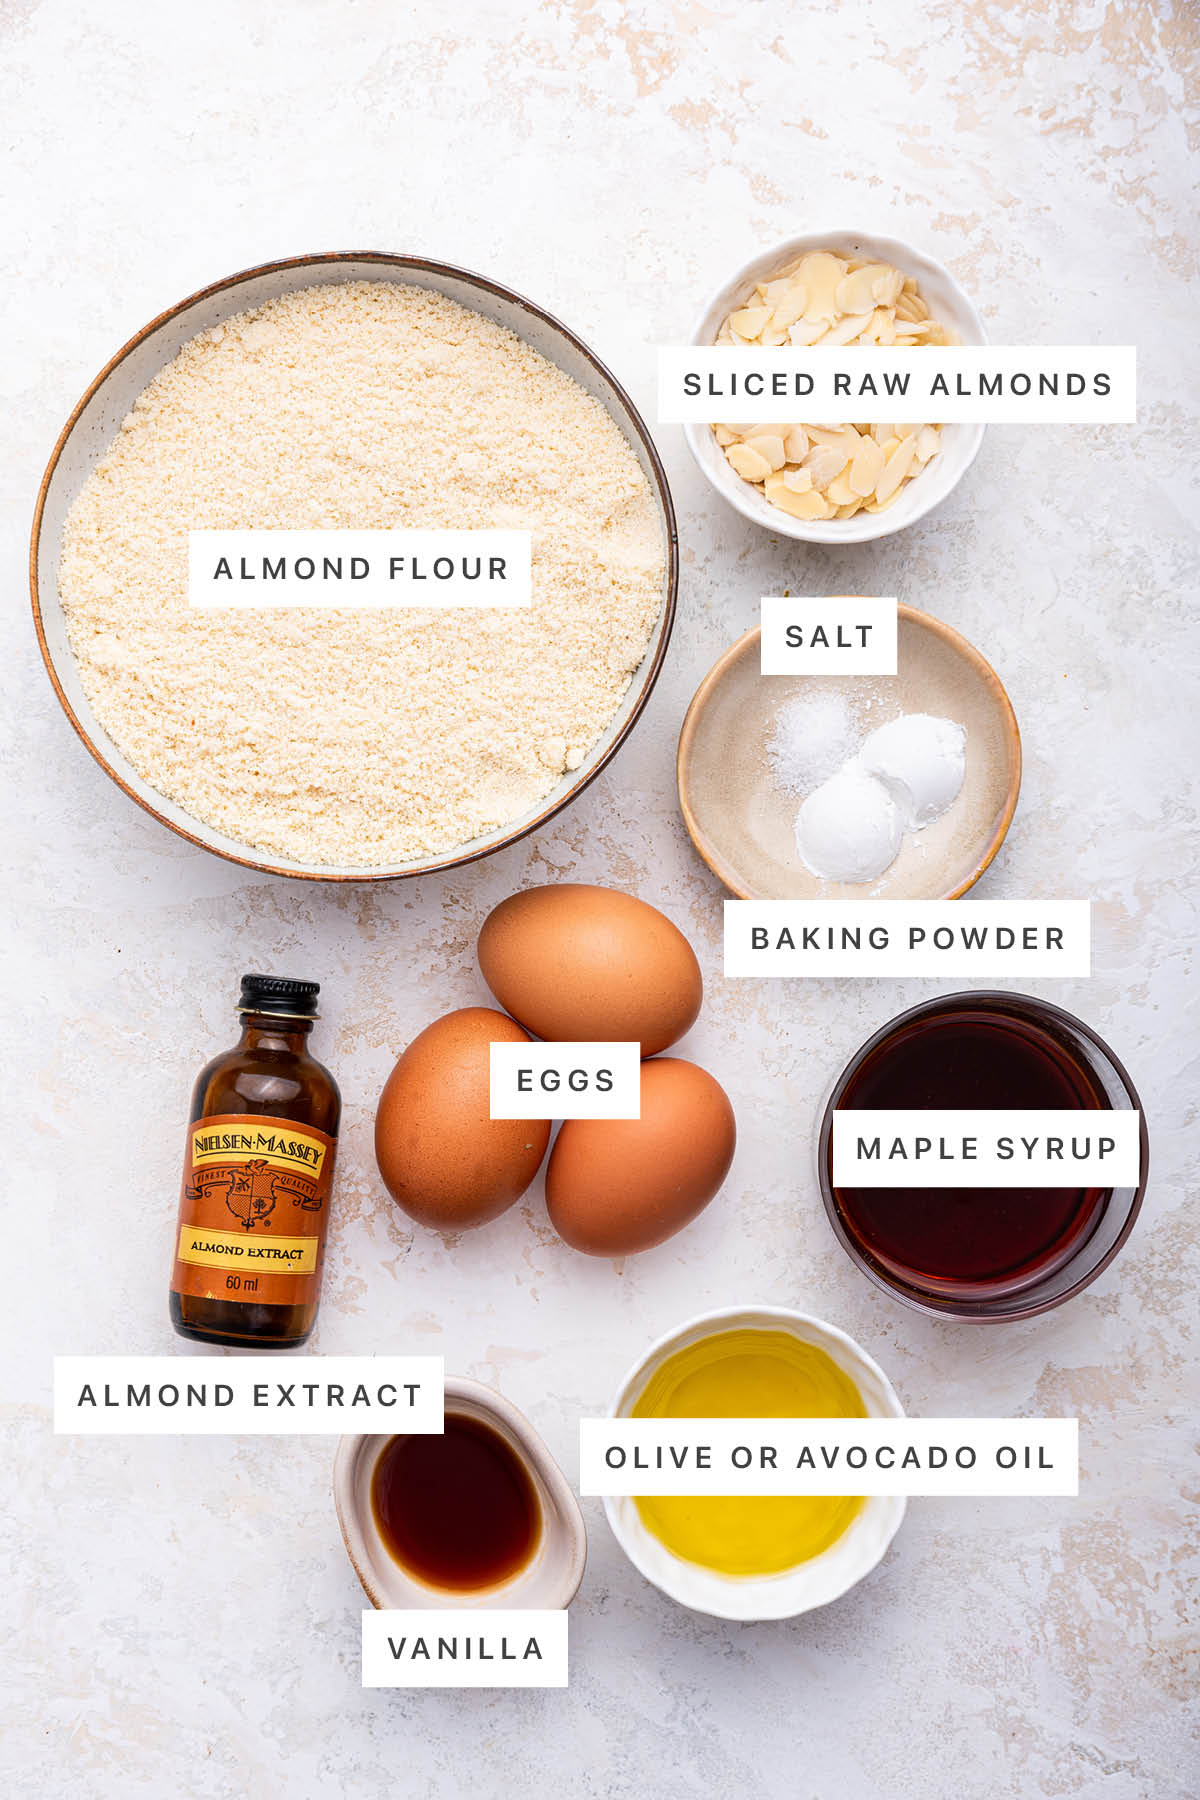 Ingredients measured out to make Almond Cake: almond flour, raw almonds, salt, baking powder, eggs, almond extract, vanilla, oil and maple syrup.